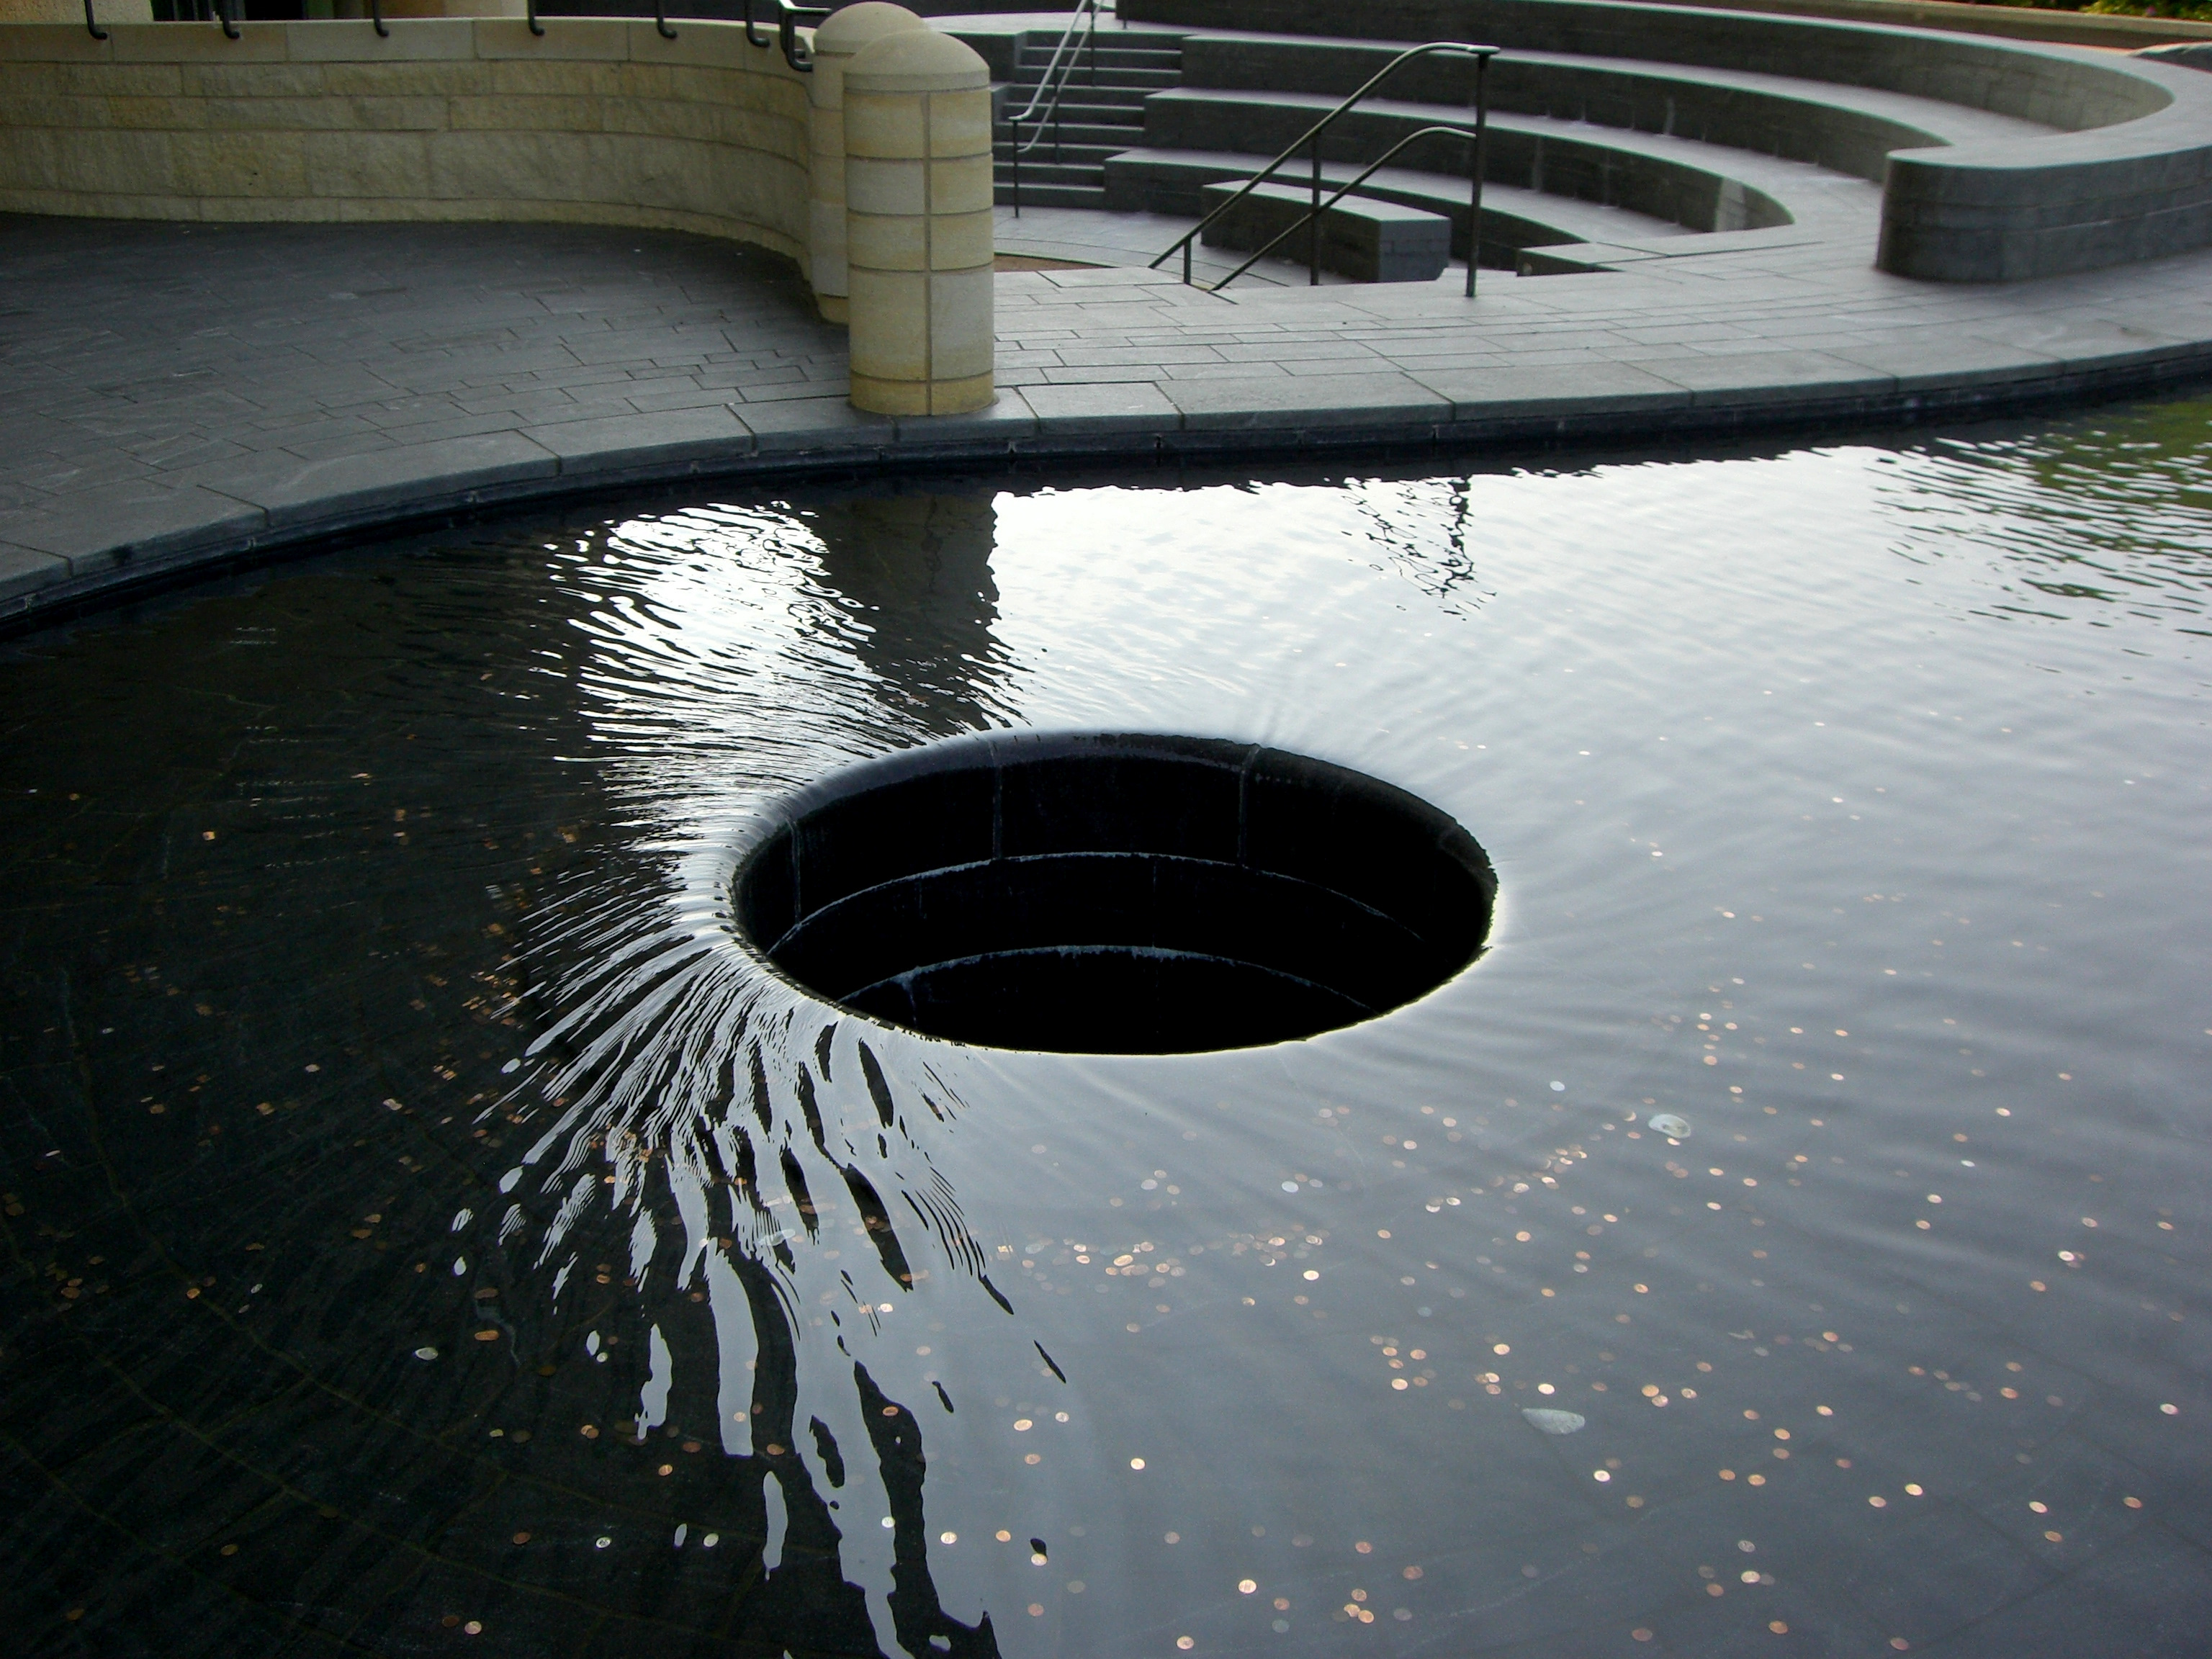 High-quality drain system installation and maintenance services for residential and commercial properties